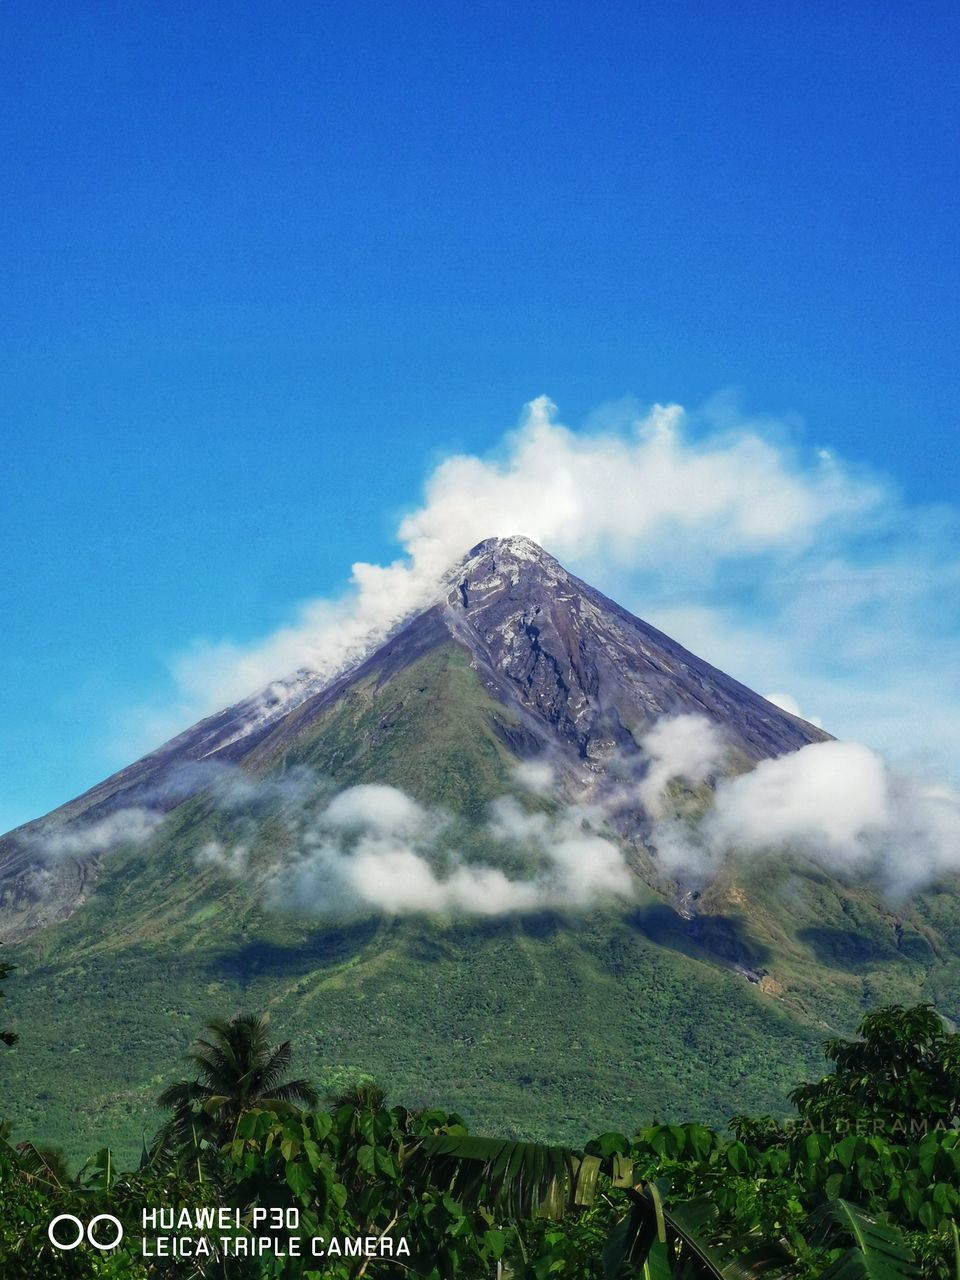 volcano, mountain, sky, stratovolcano, smoke, landscape, volcanic landscape, environment, cloud, beauty in nature, geology, volcanic crater, scenics - nature, nature, active volcano, no people, land, erupting, cinder cone, plant, non-urban scene, travel destinations, blue, day, mountain peak, outdoors, travel, plain, tree, plateau, physical geography, tranquil scene, lava dome, tourism